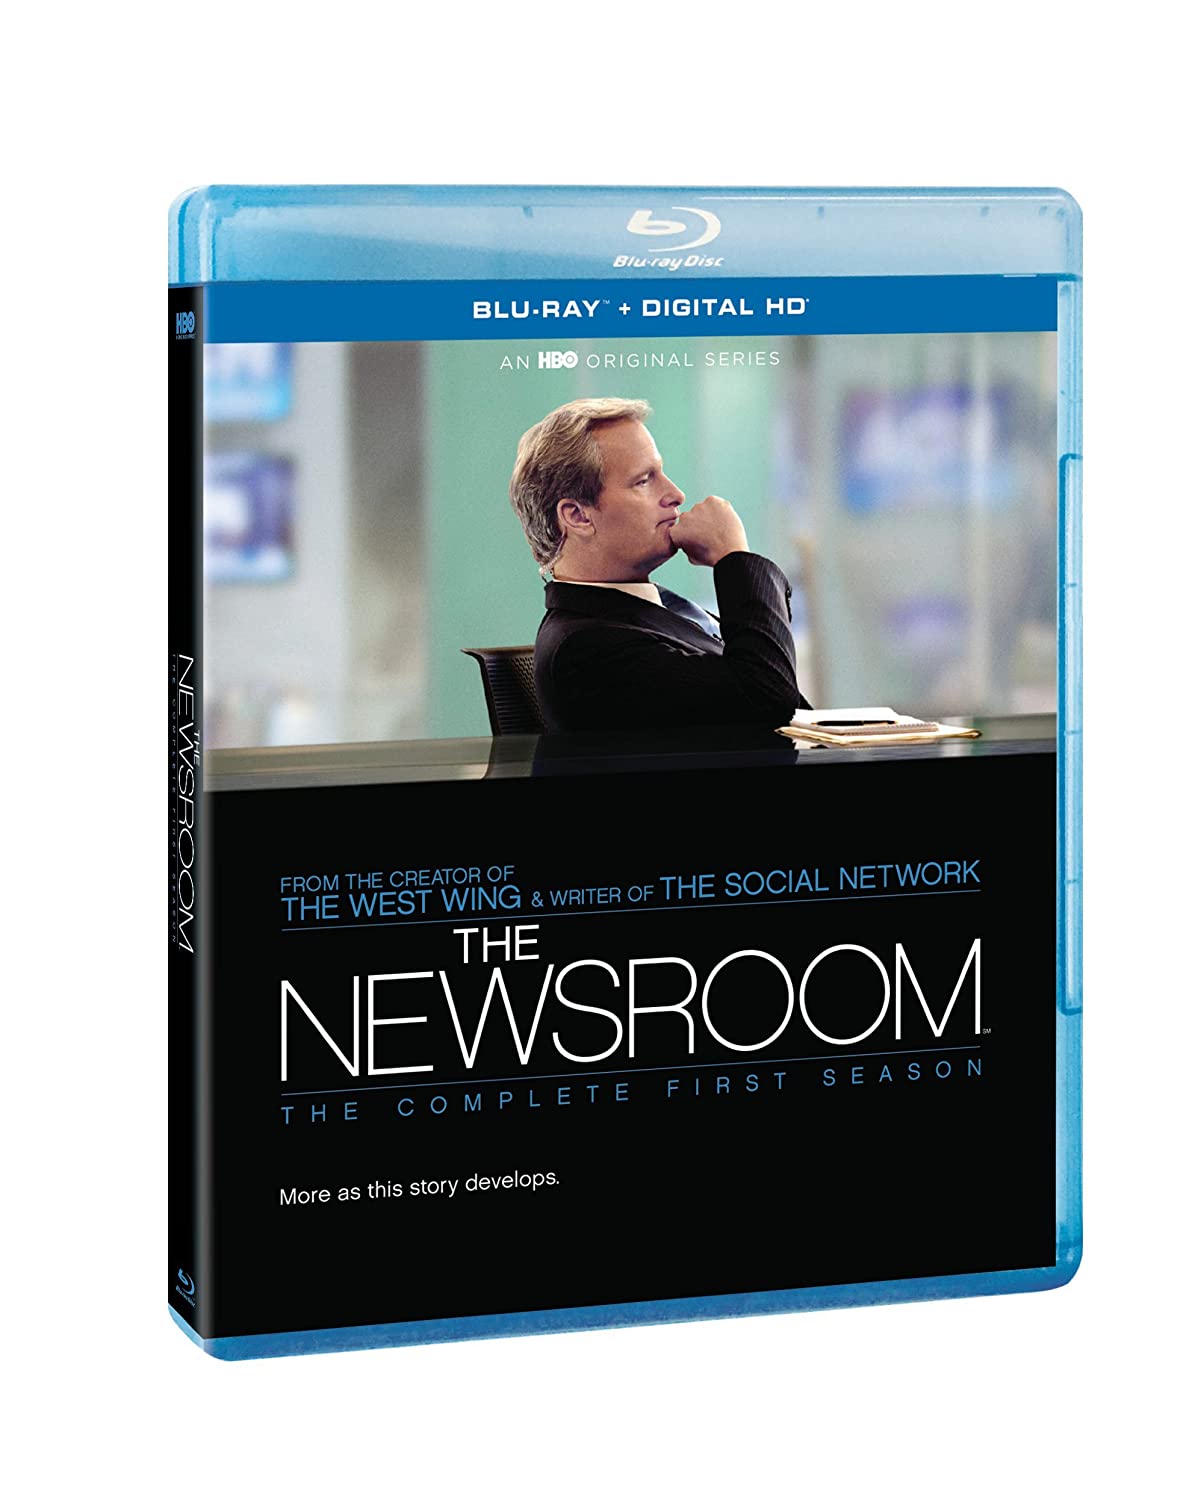 The Newsroom Complete First Season - Darkside Records